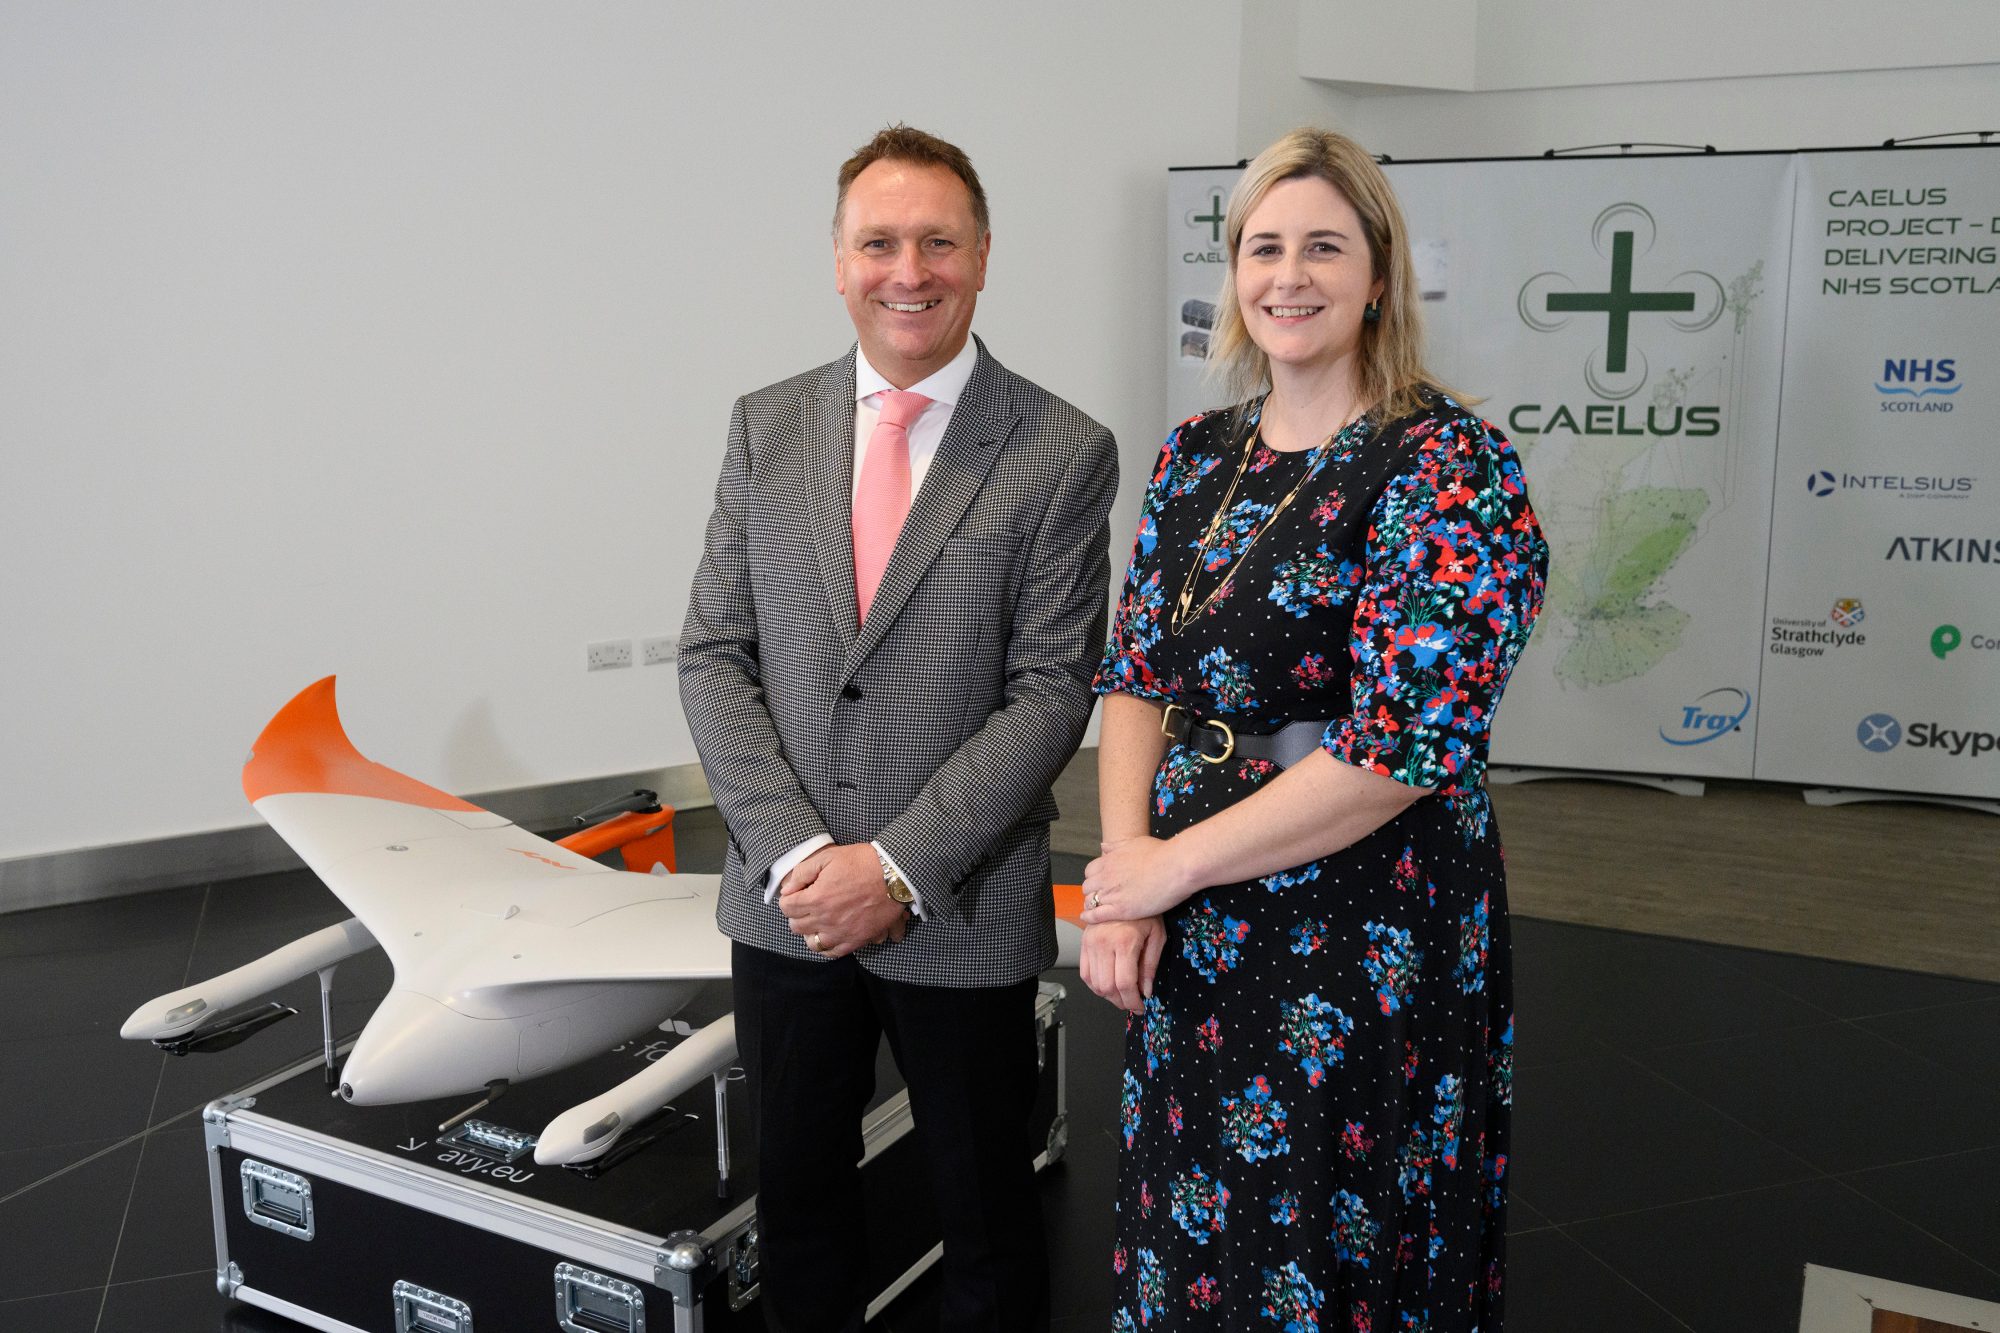 Man and woman stand next to model of medical drone as part of the launch of CAELUS at Glasgow airport Caption: AGS Airports Ltd CEO Derek Provan with Fiona Smith, AGS Group’s Head of Aerodrome Strategy, who is leading the CAELUS project.